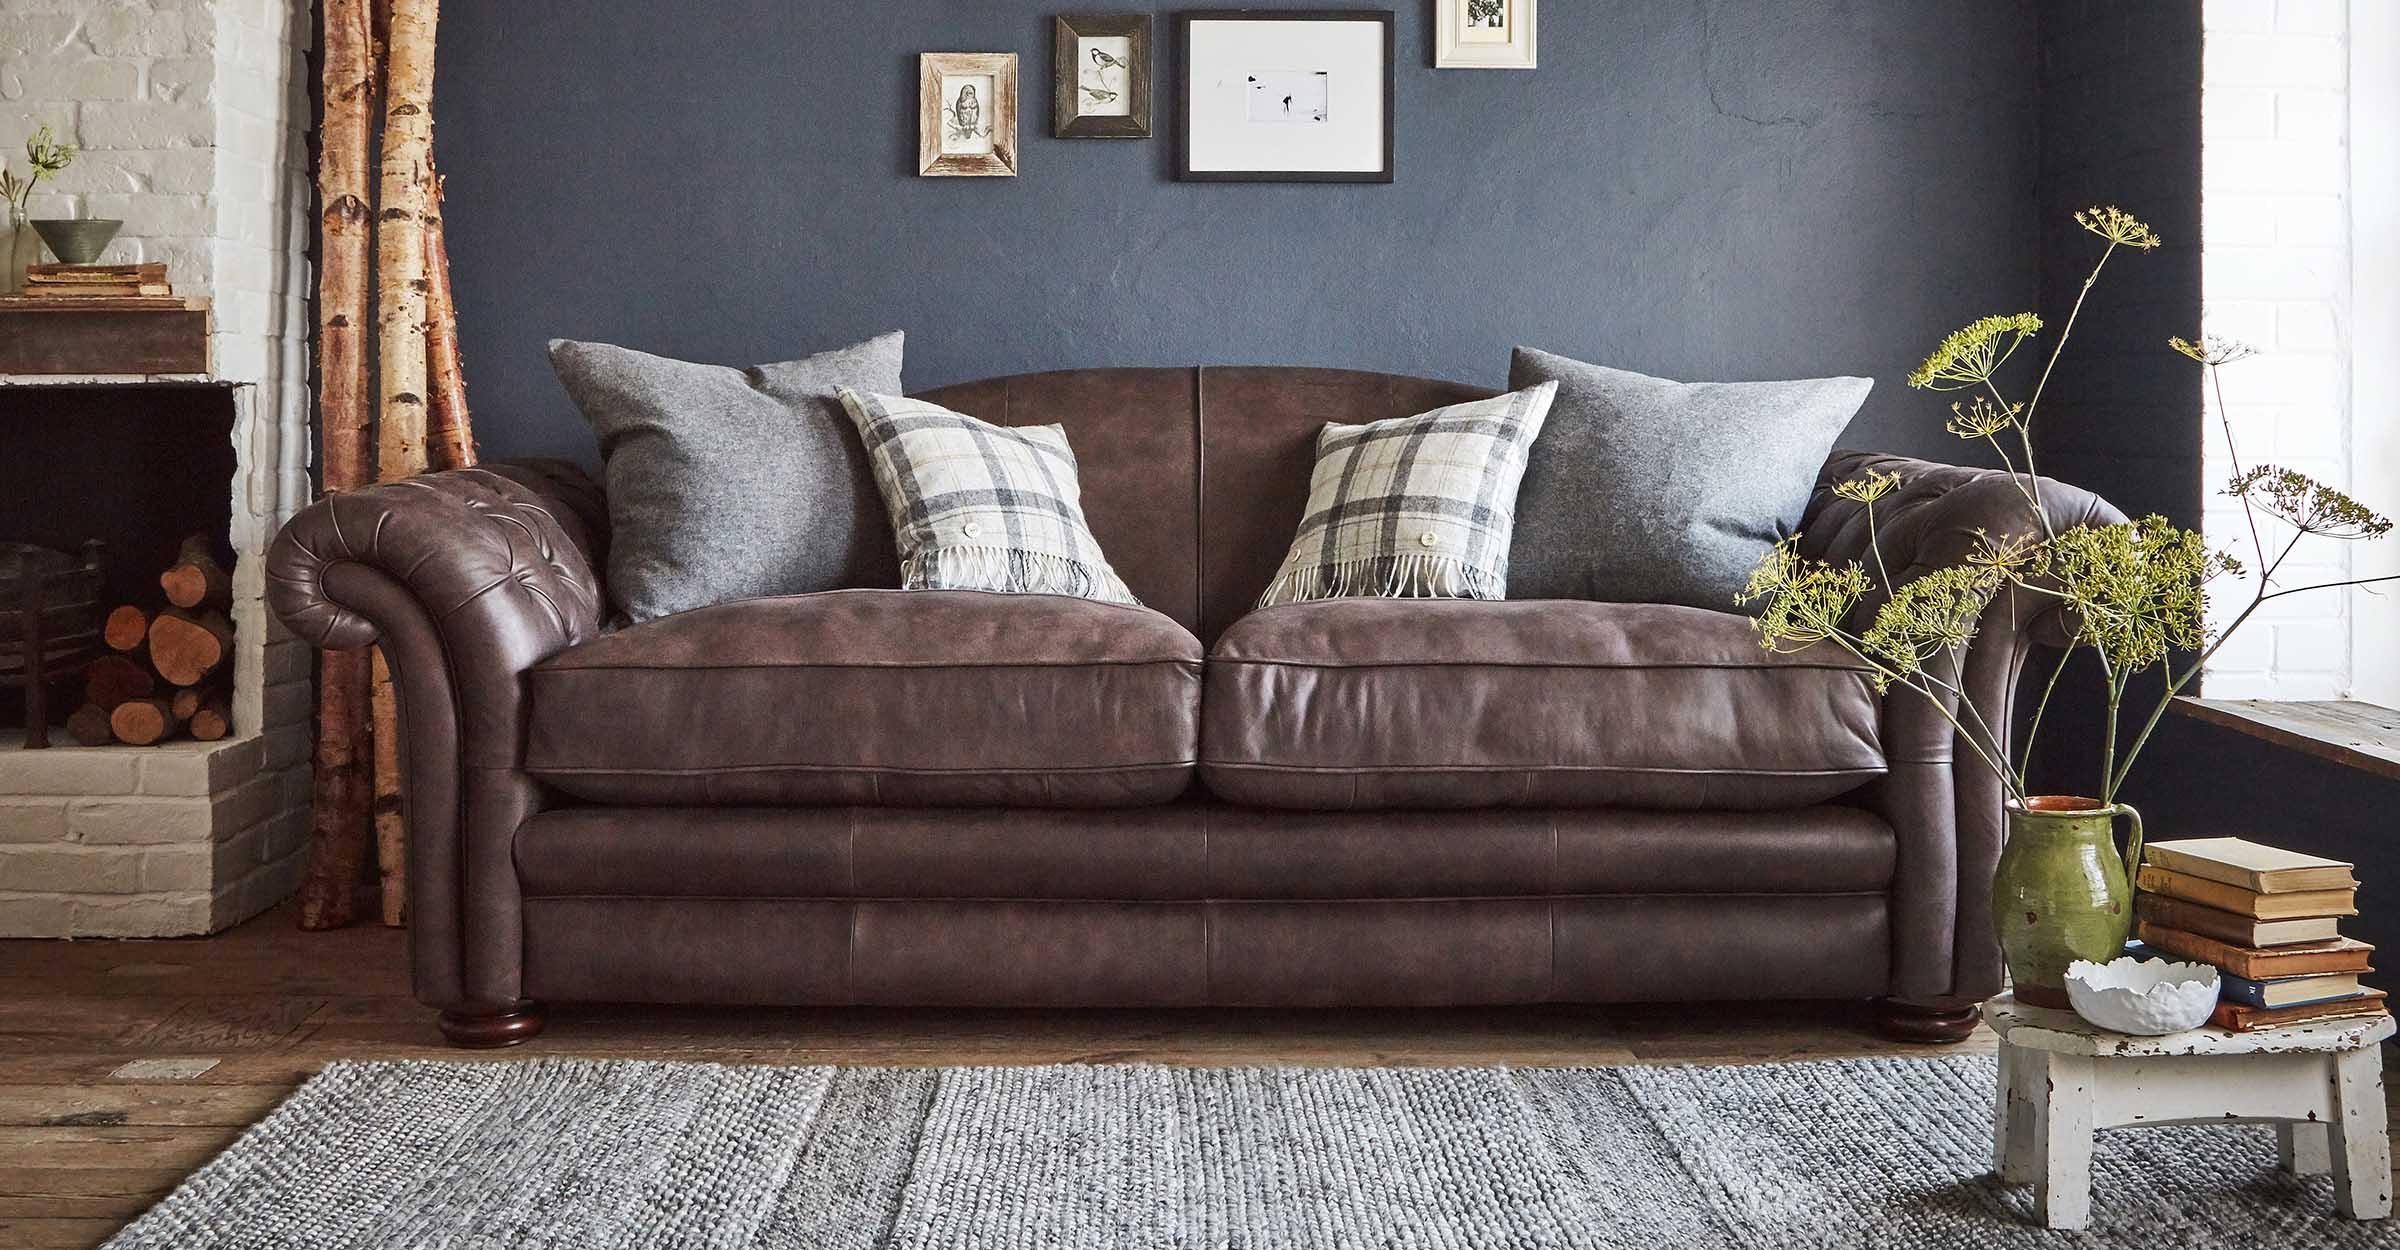 Brown Sofas Dfs, Leather Sofa In Living Room